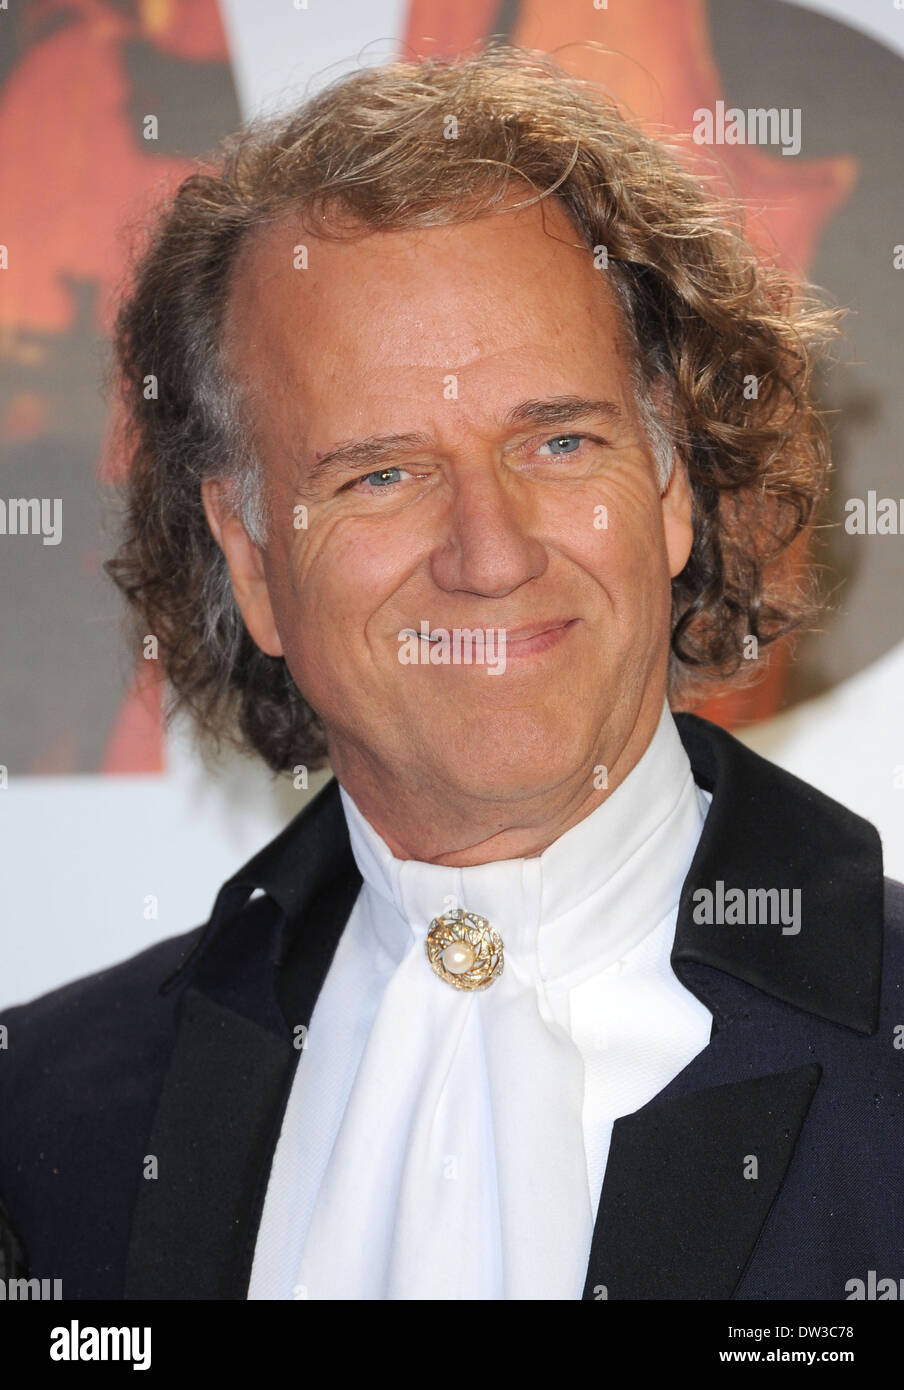 Andre Rieu at the Classical BRIT Awards at Royal Albert Hall London, England- 02.10.12 Featuring: Andre Rieu Where: London, United Kingdom When: 02 Oct 2012 Stock Photo